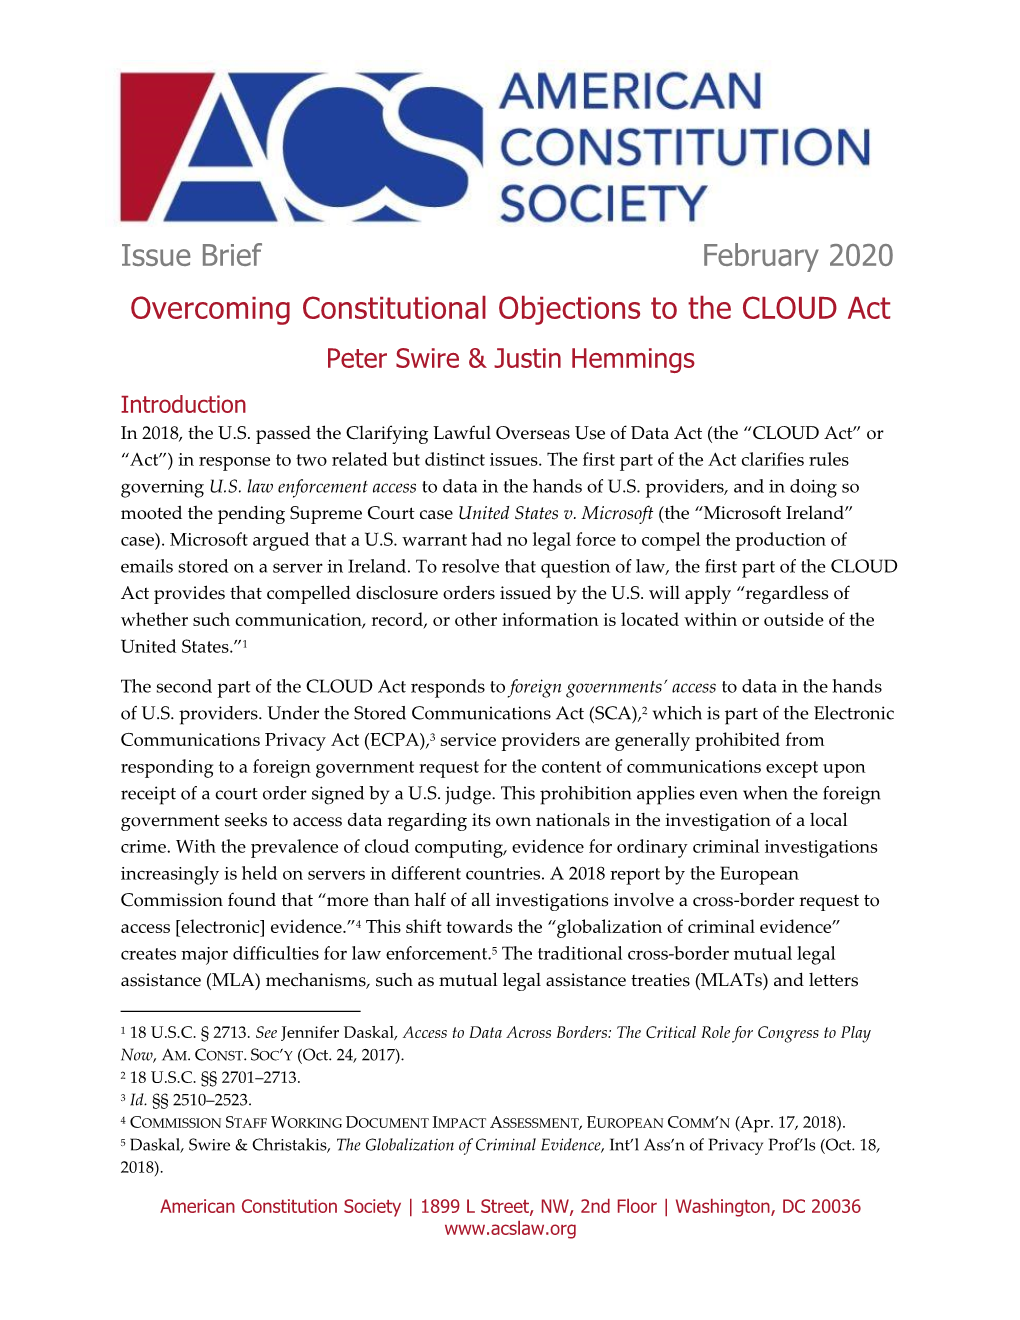 Overcoming Constitutional Objections to the CLOUD Act Peter Swire & Justin Hemmings Introduction in 2018, the U.S